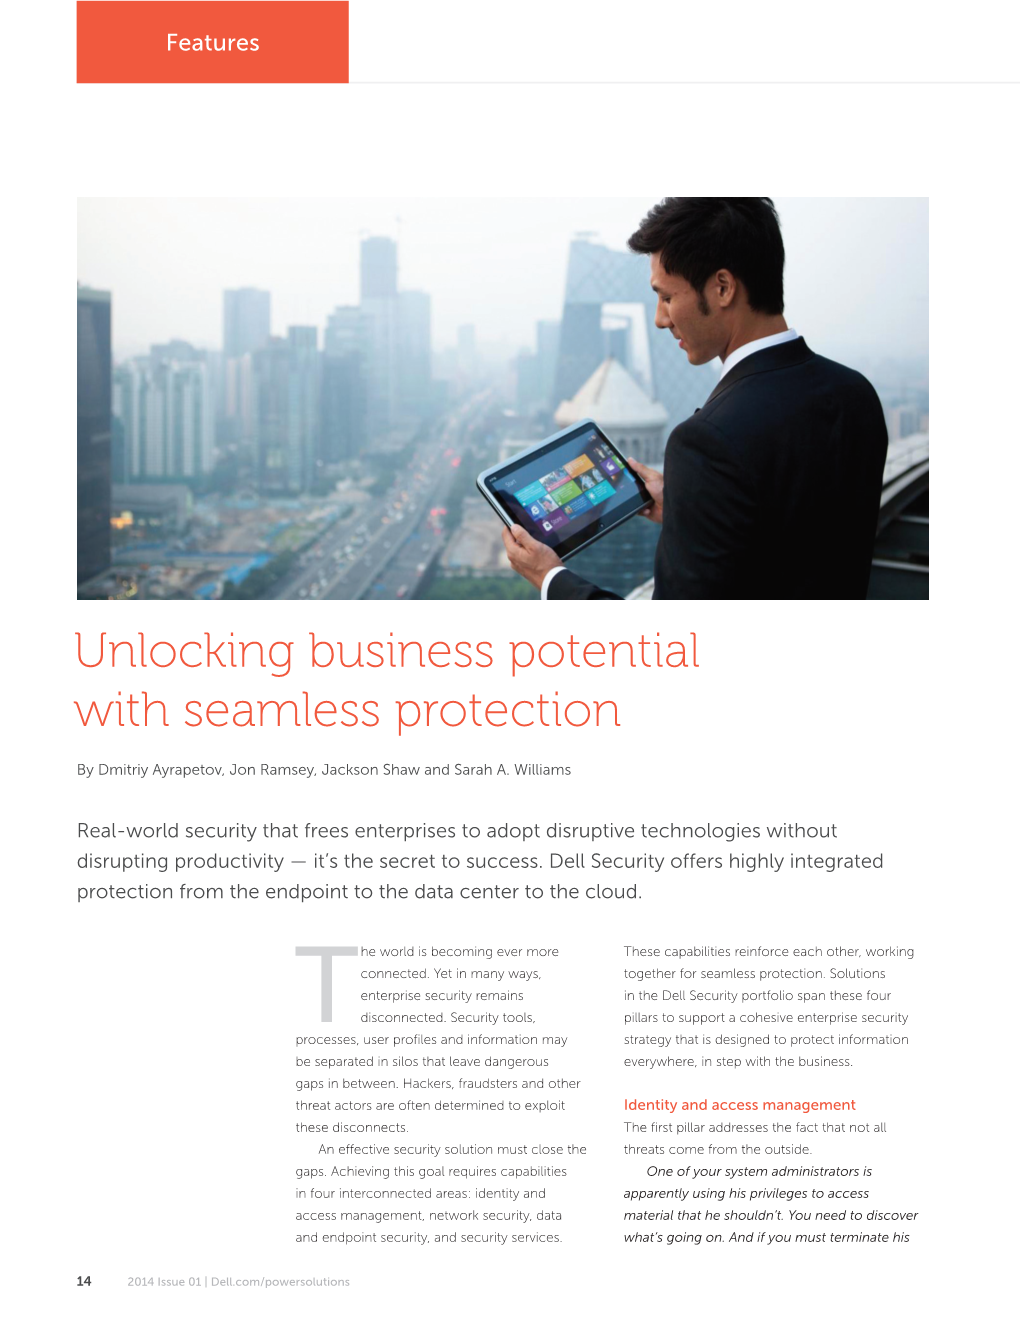 Unlocking Business Potential with Seamless Protection